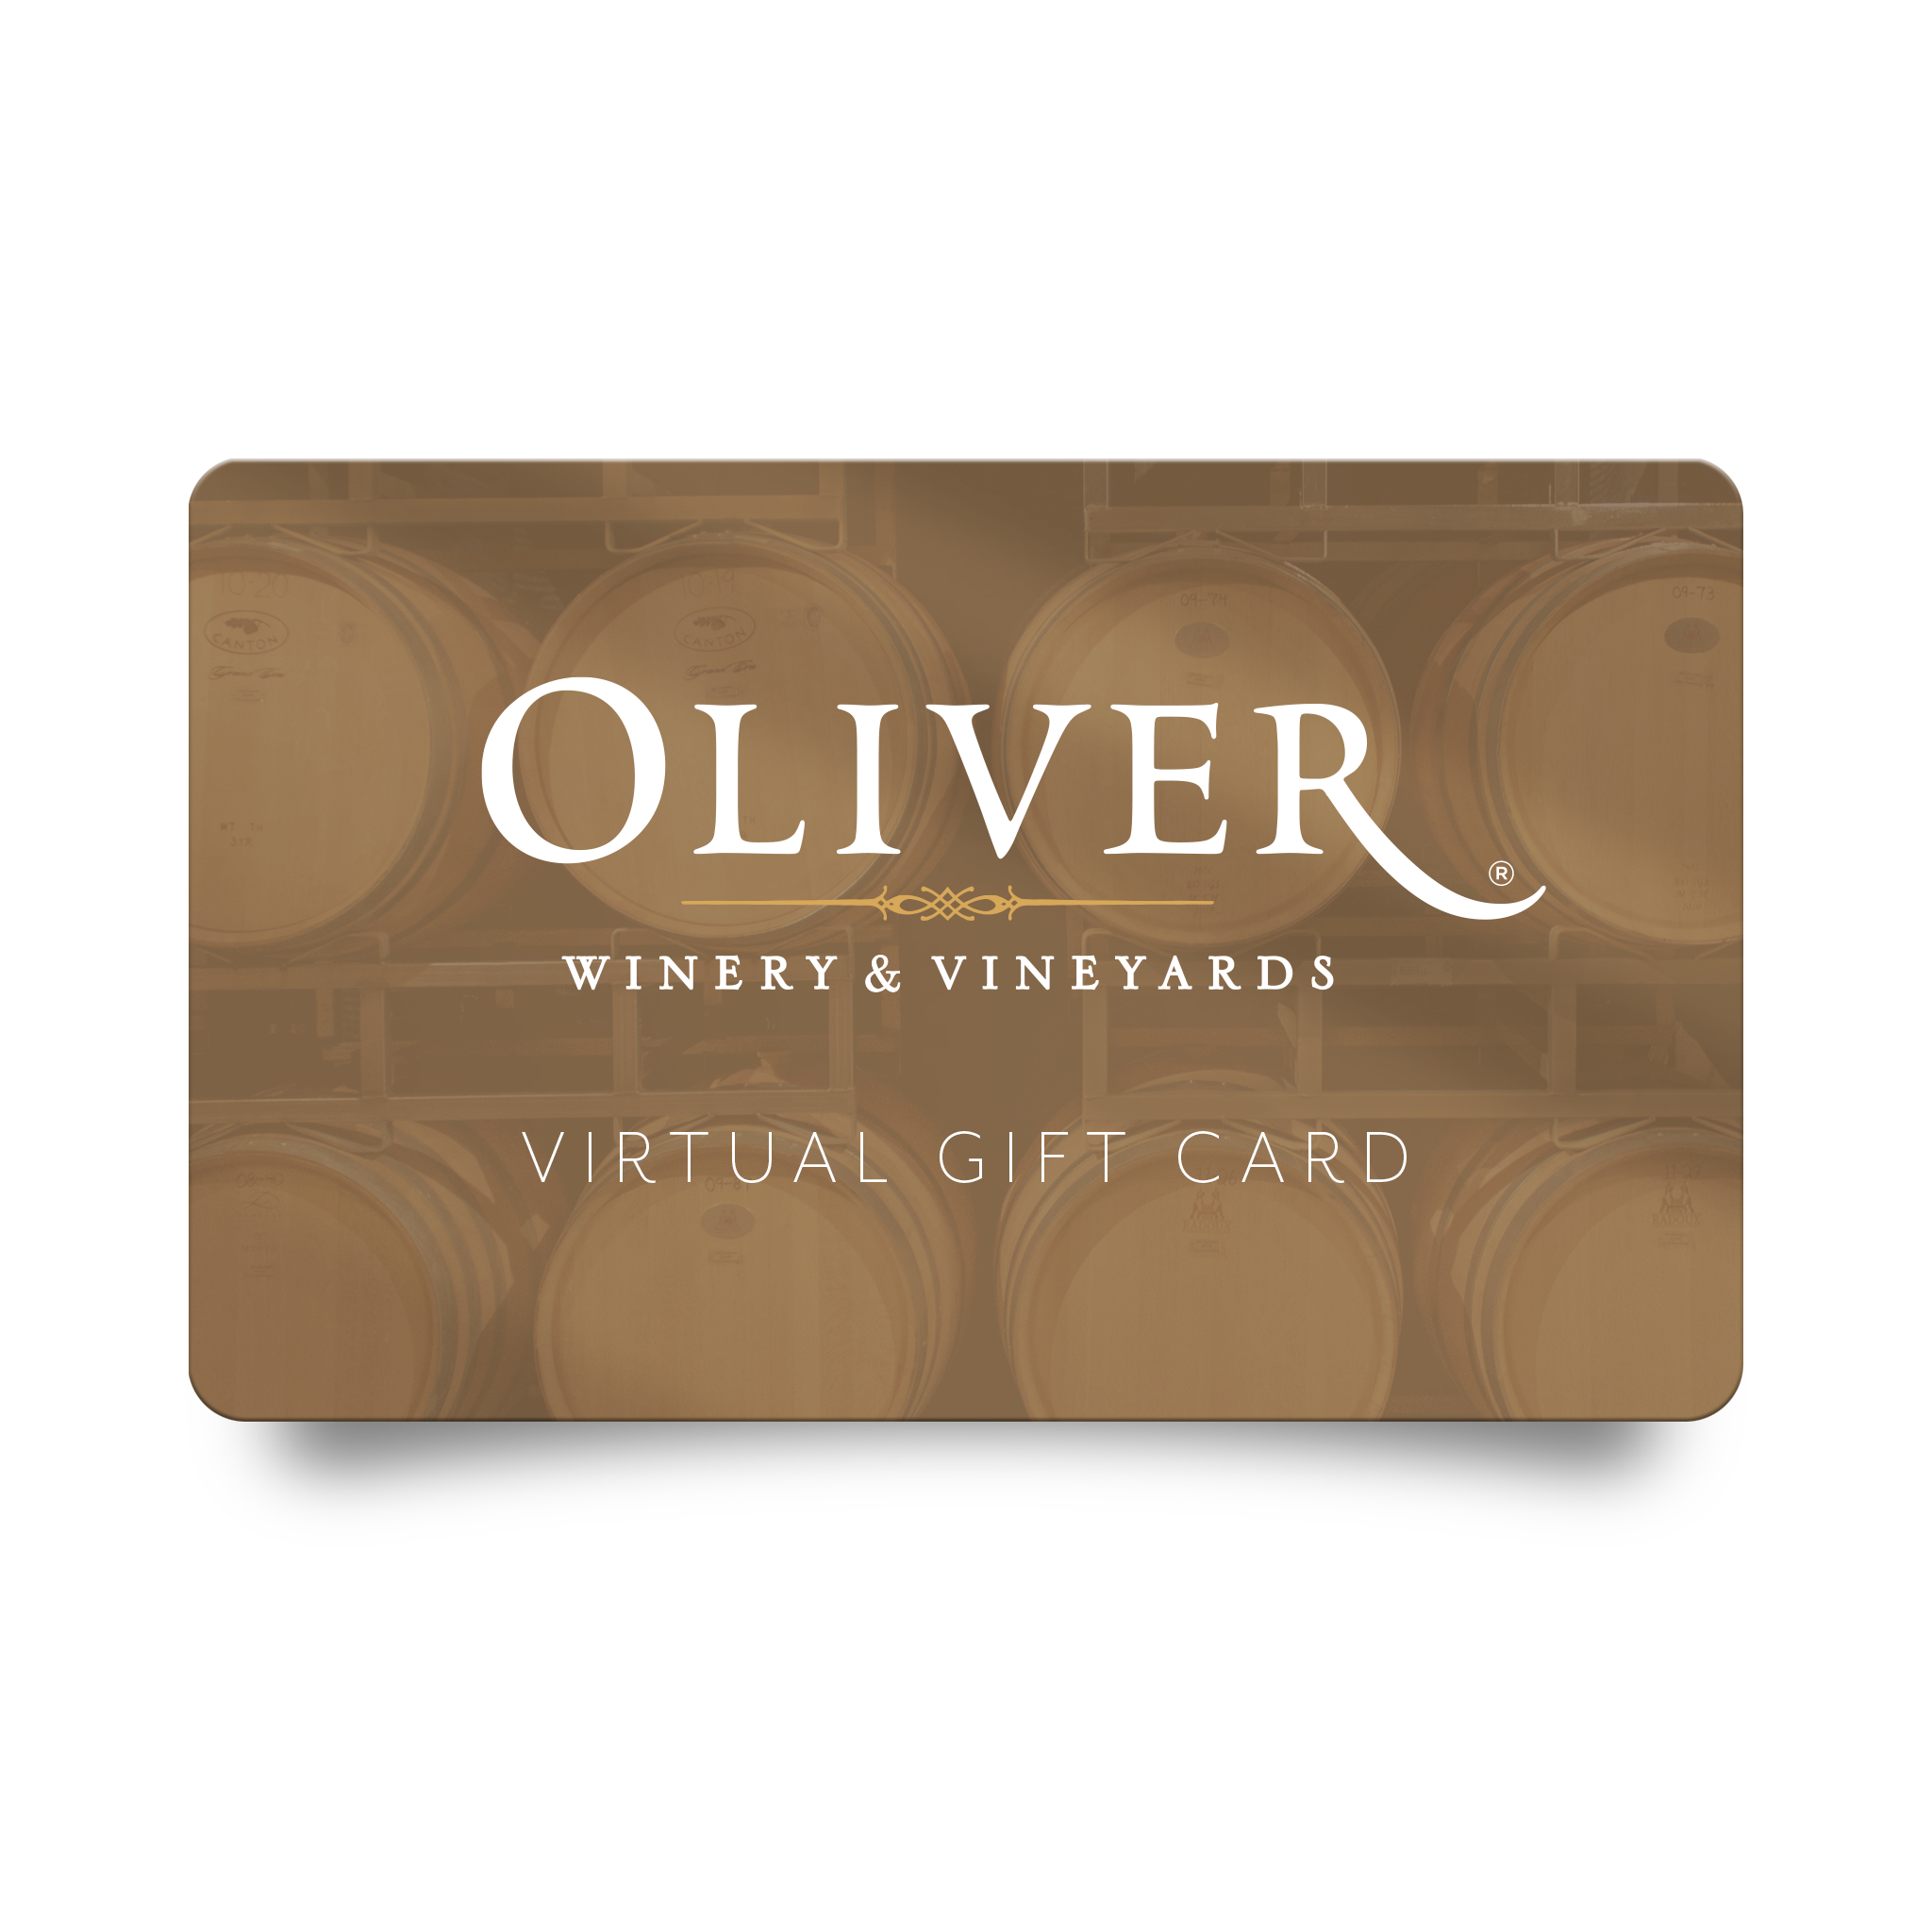 send-an-e-gift-card-oliver-winery-vineyards